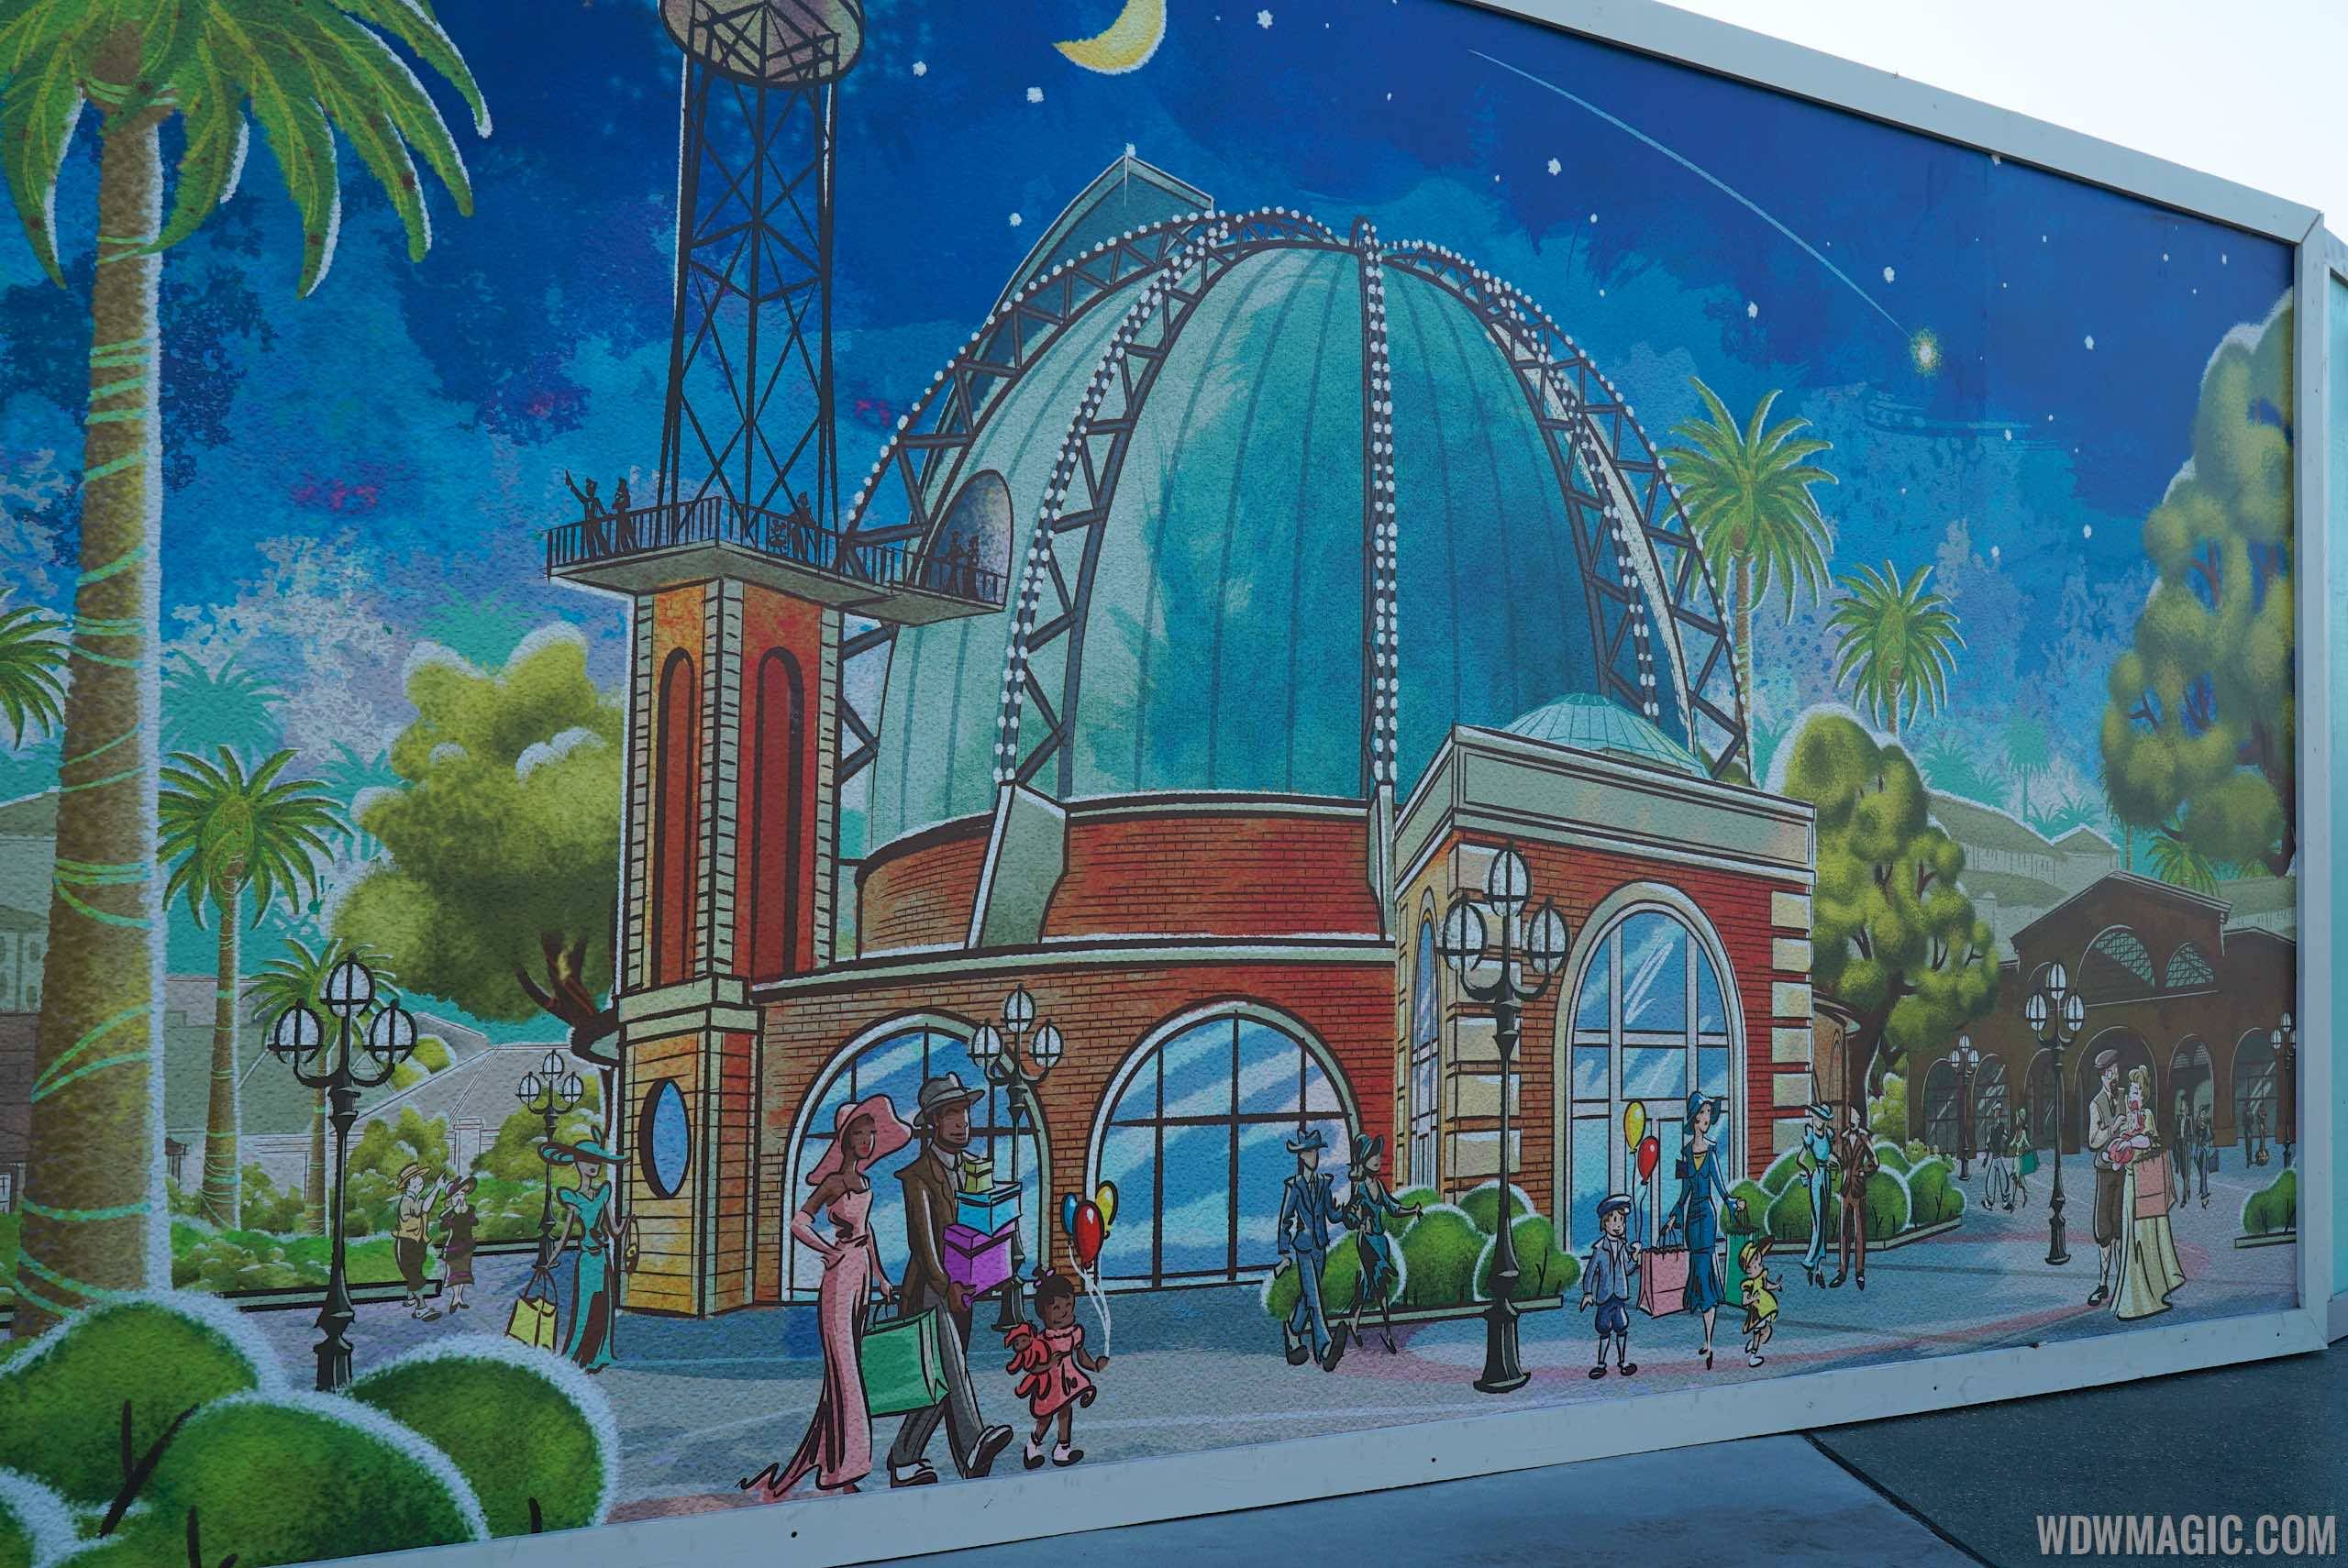 Guy Fieri joins forces with the new Planet Hollywood Observatory at Disney Springs